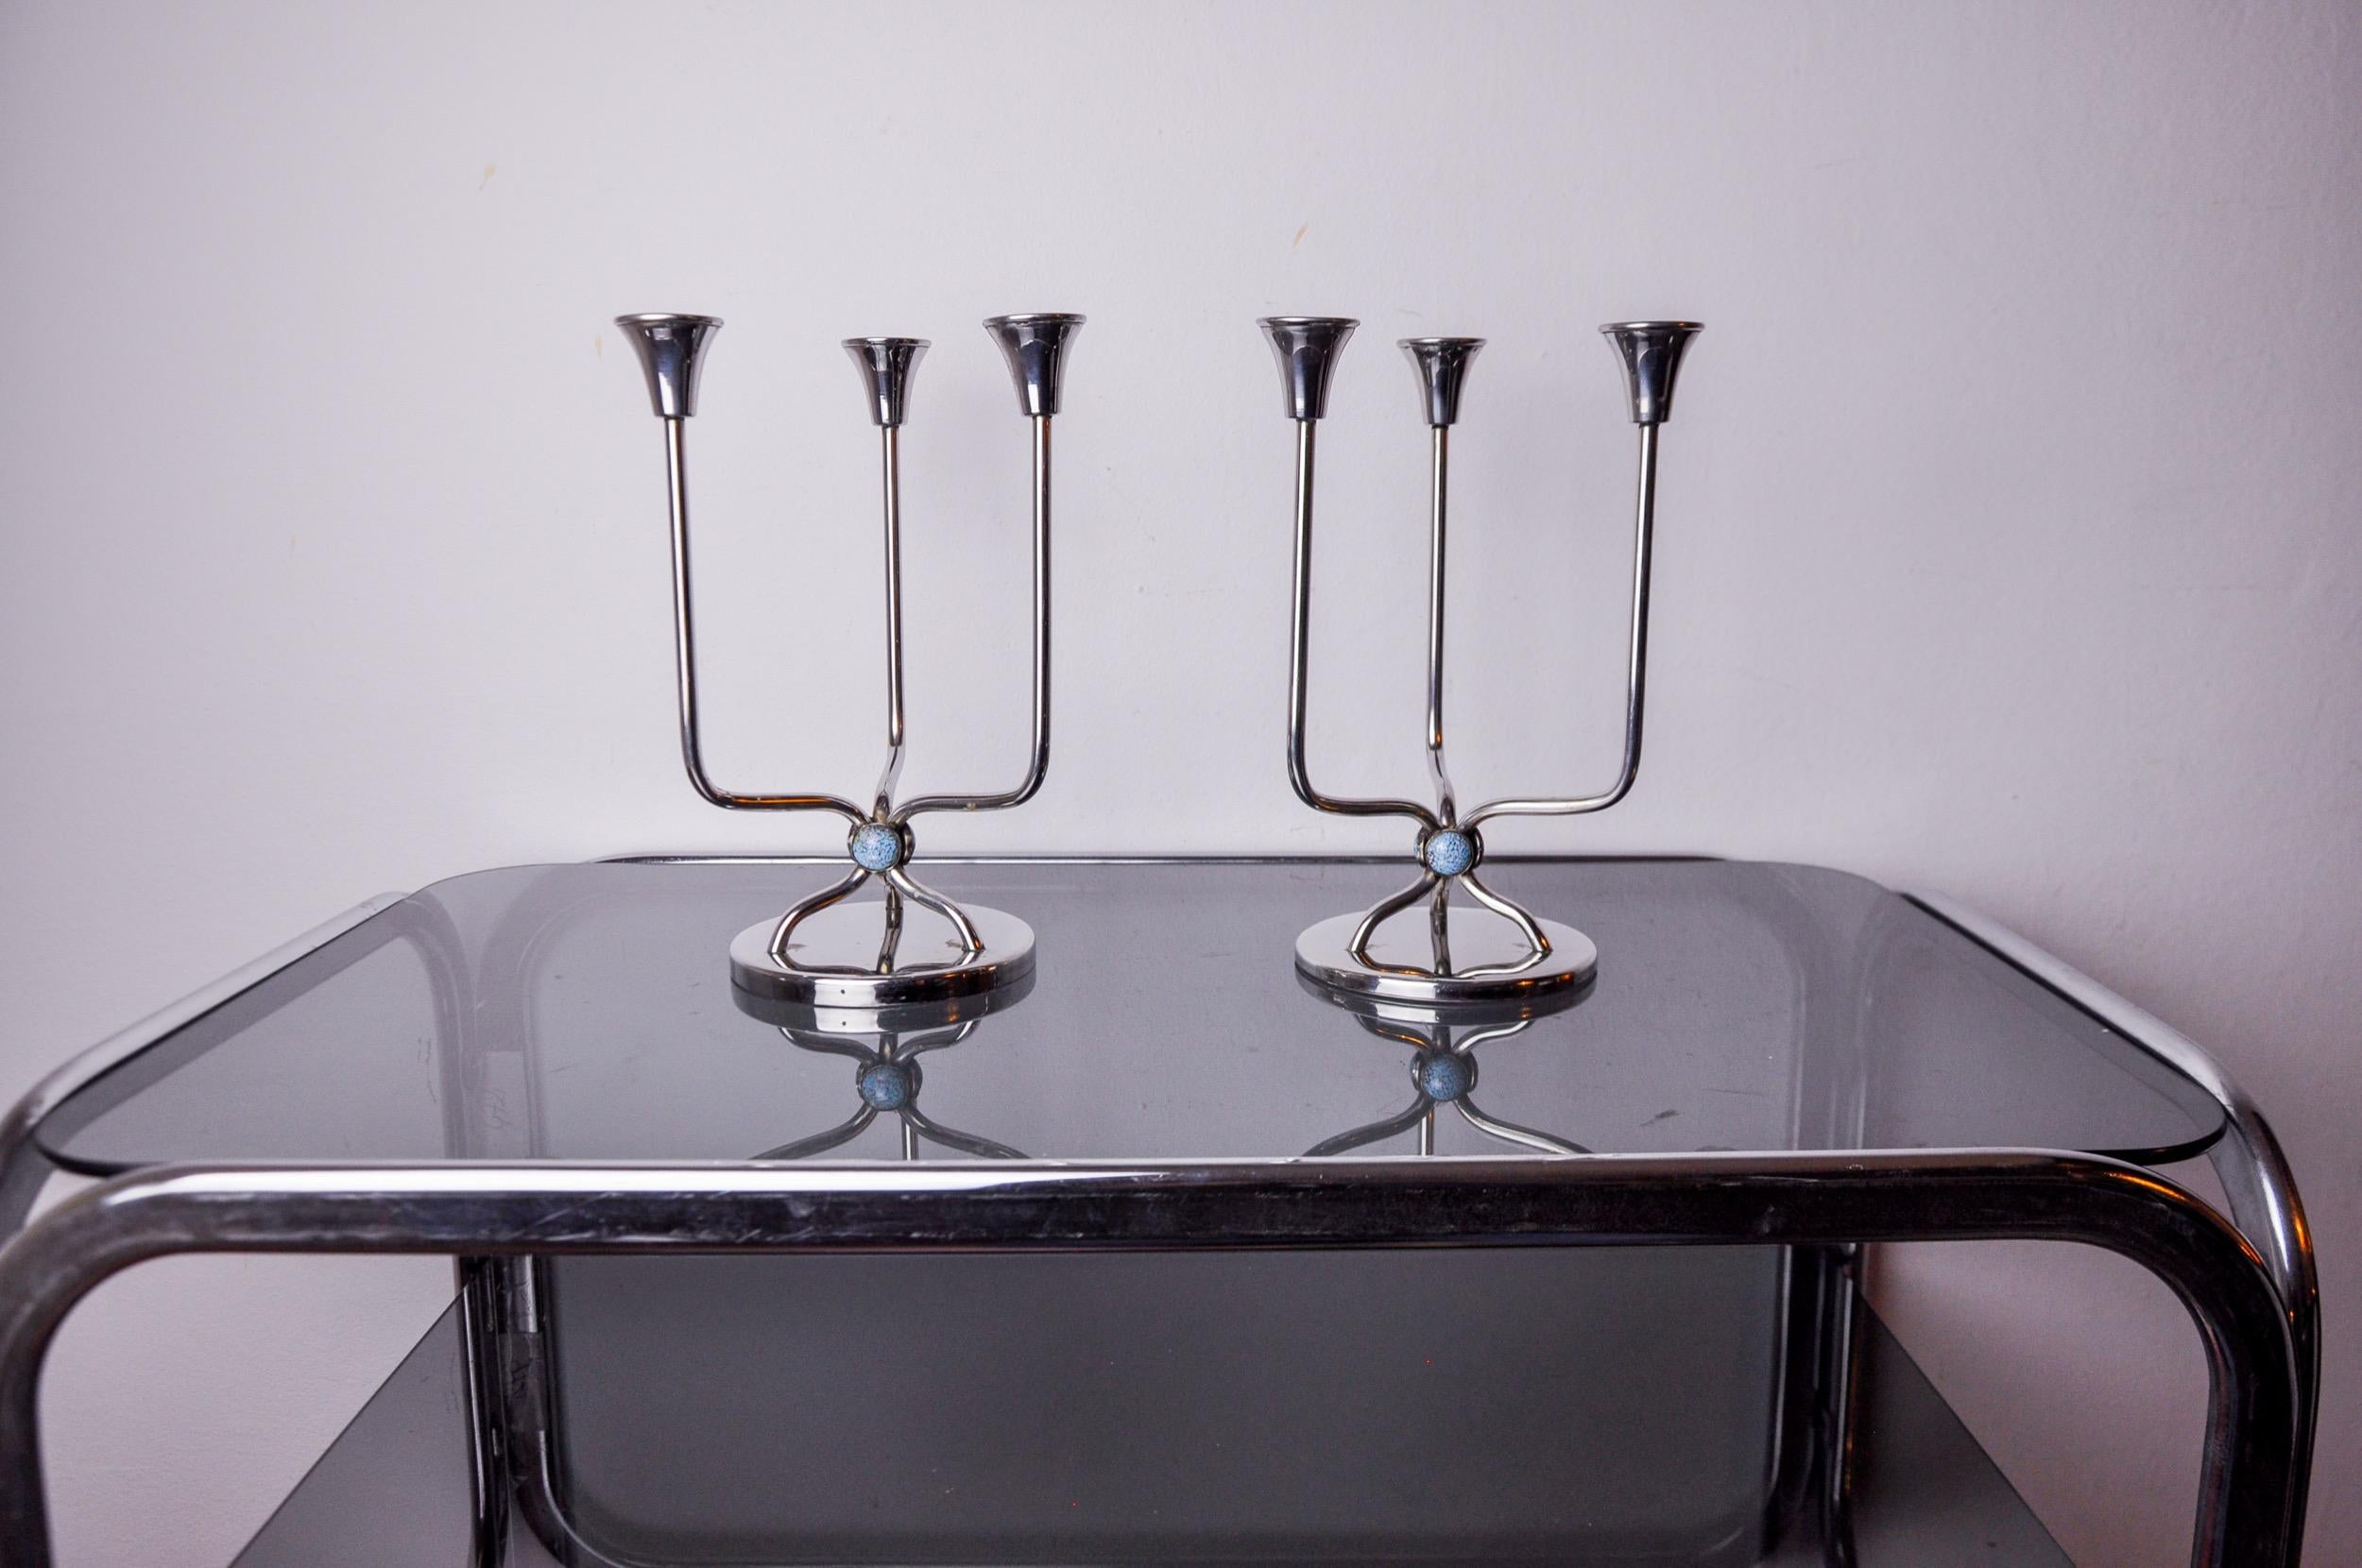 Superb pair of art deco candlesticks in stainless steel designed and produced in spain in the 1970s. Structure in stainless steel 18/8 that can accommodate 3 candles decorated with blue stones. Superb design object that will decorate your interior